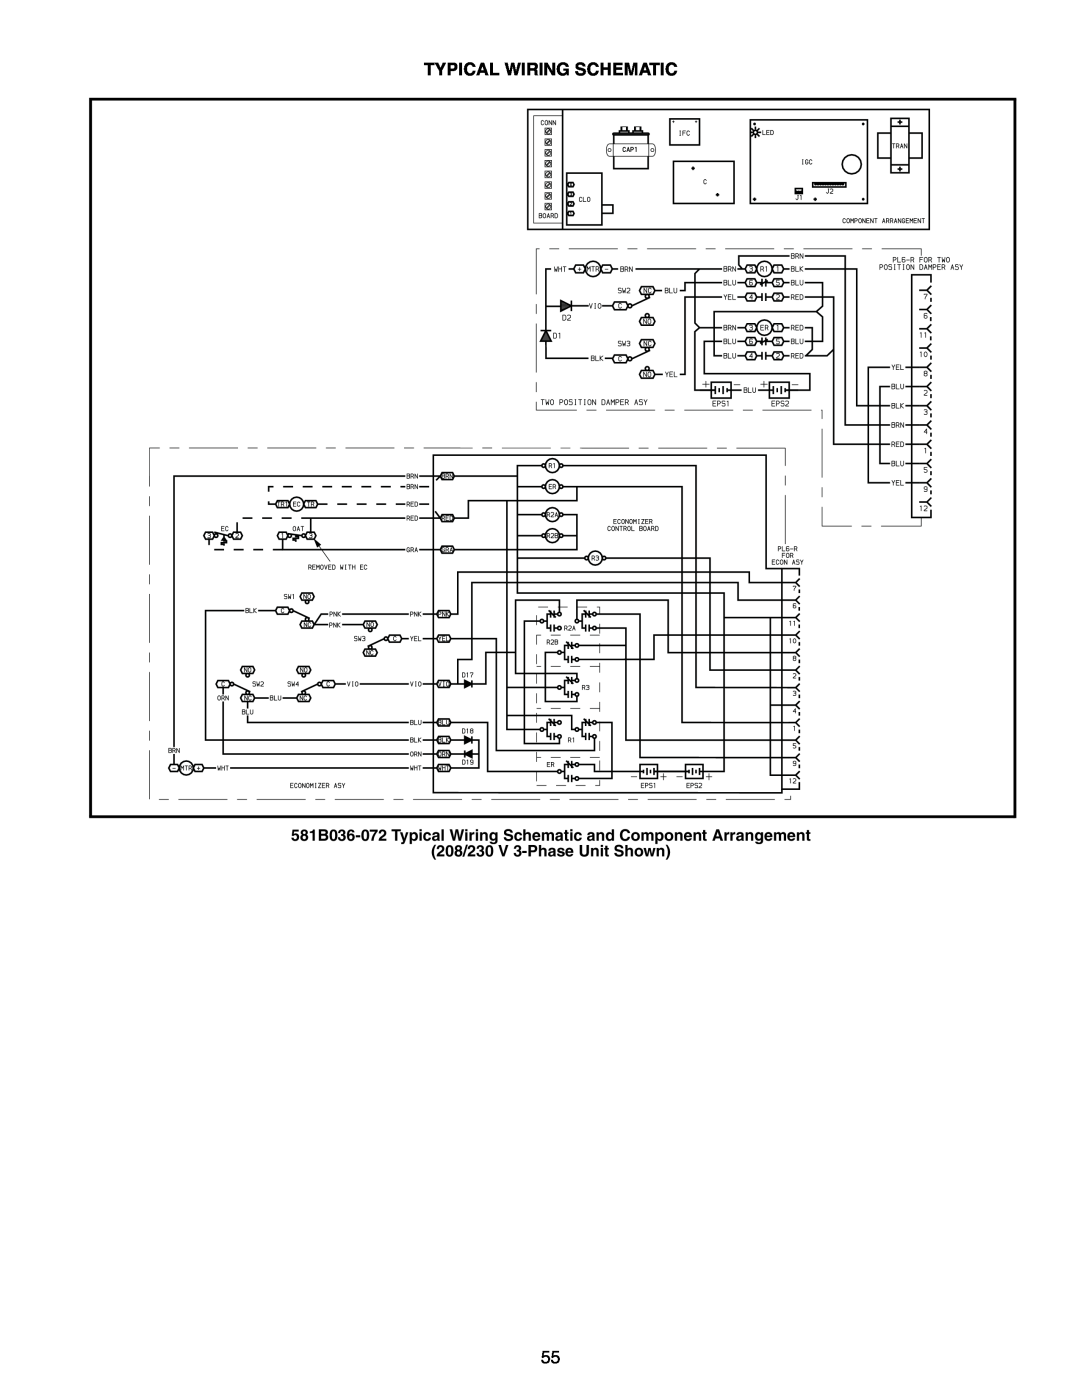 Bryant 581B manual Typical Wiring Schematic, 208/230 V 3-PhaseUnit Shown 